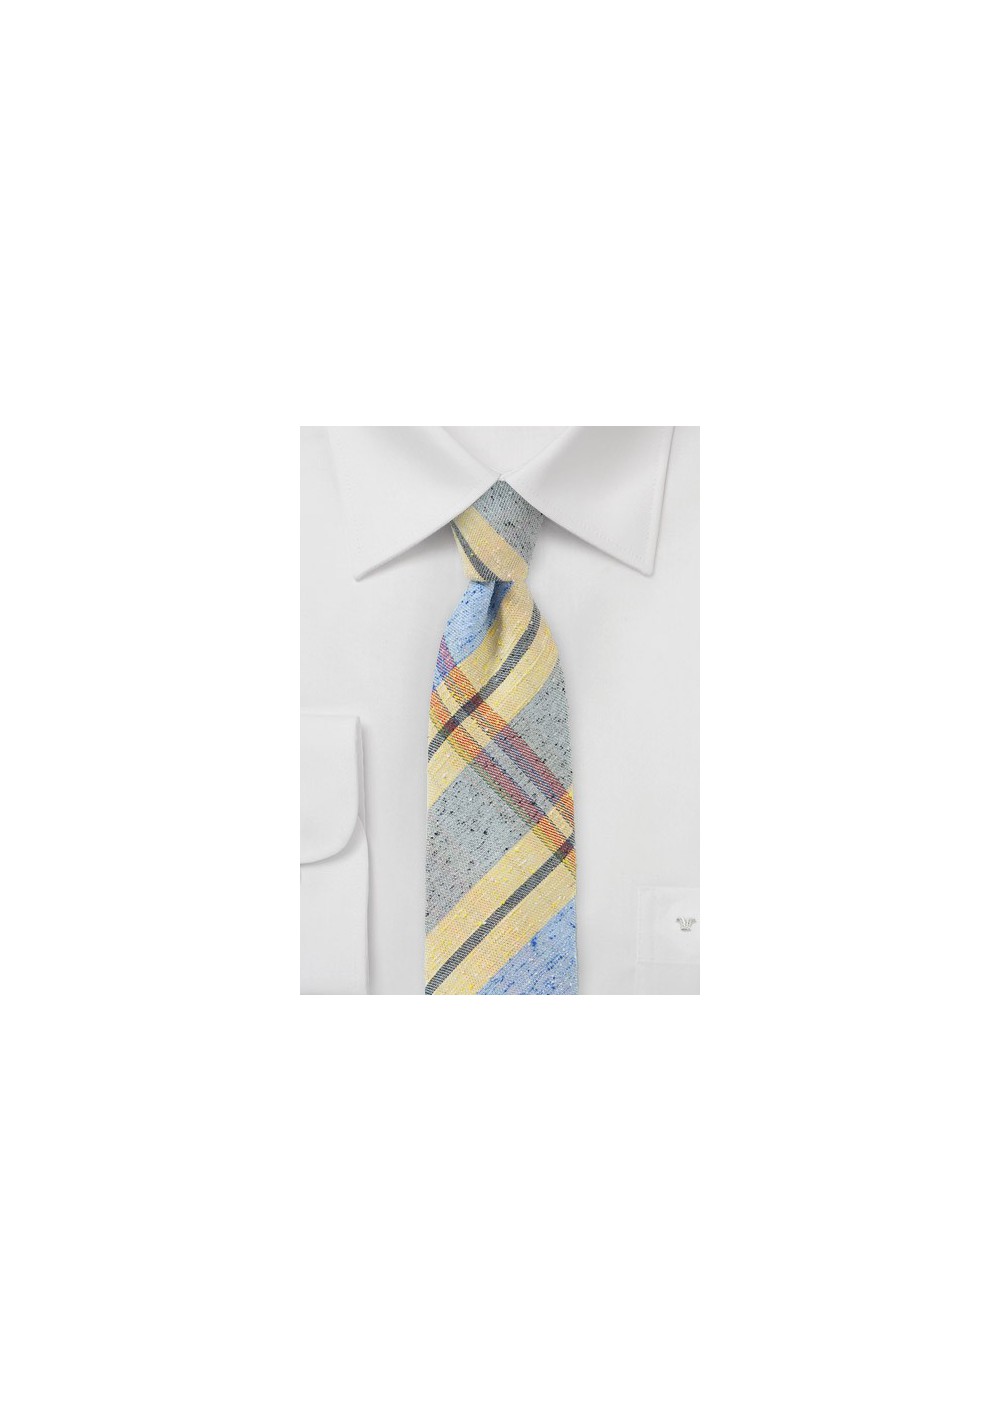 Summer Plaid Skinny Tie in Yellow and Blue